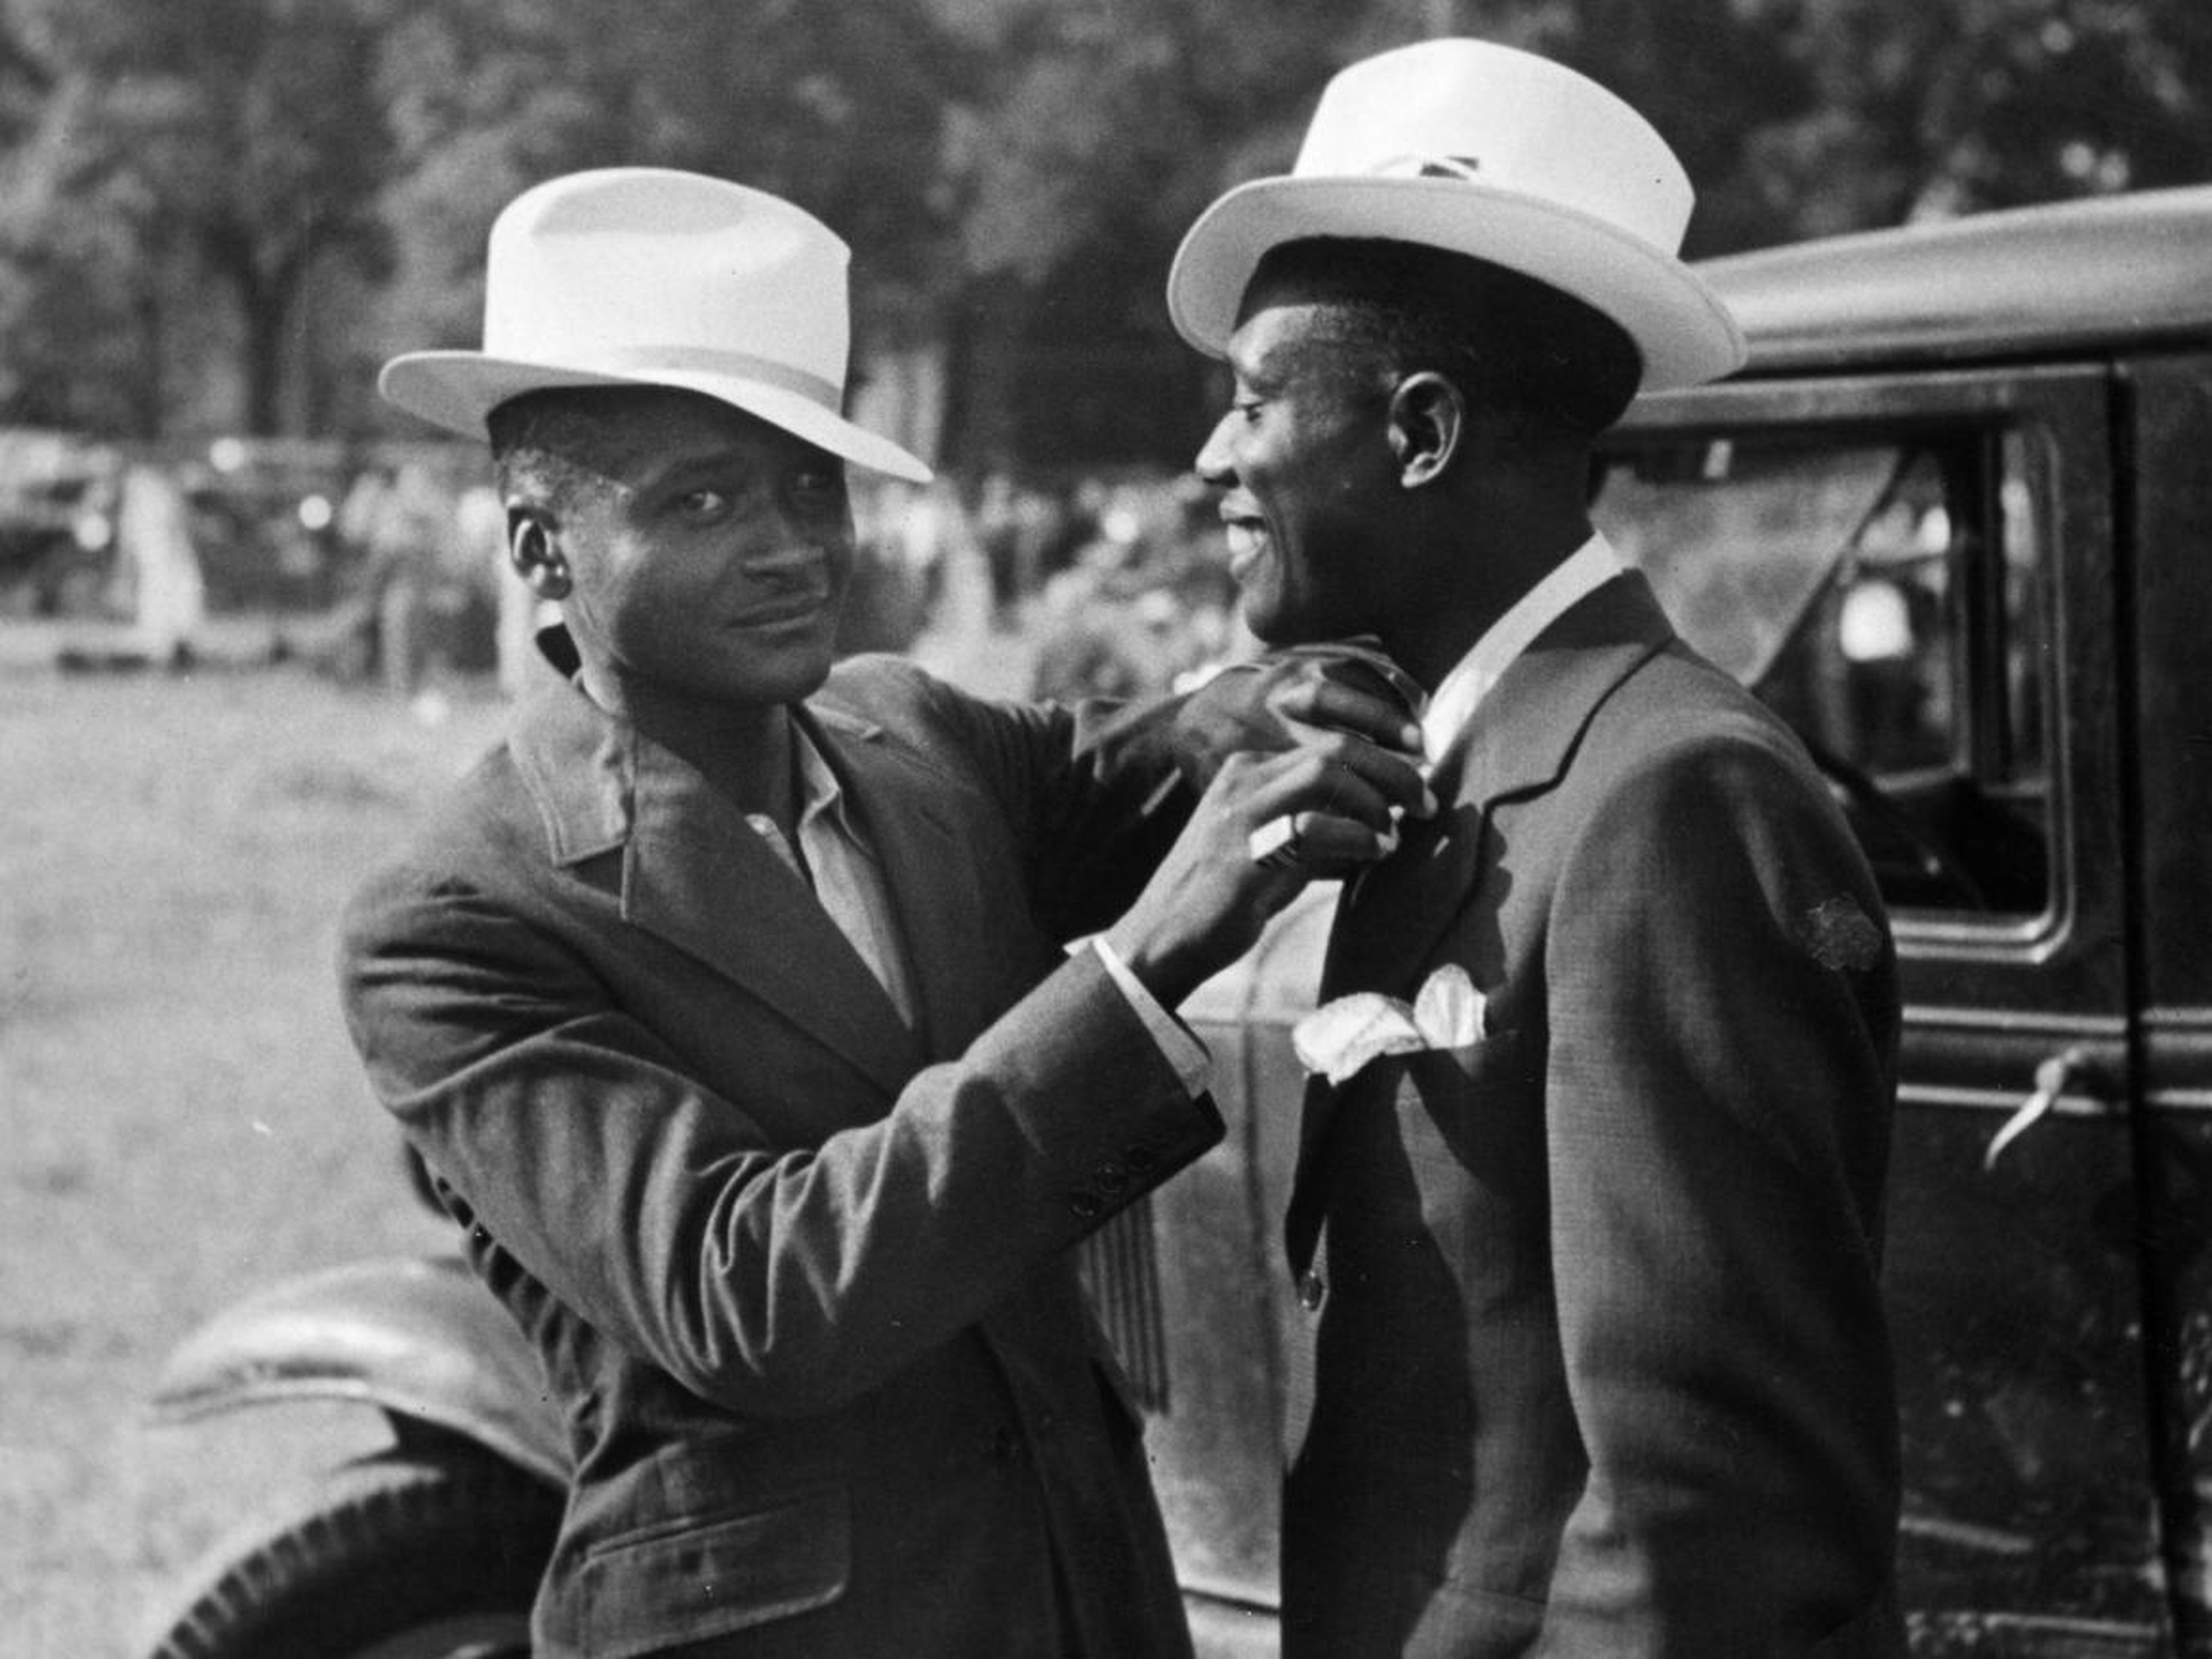 And don't forget hats. Hats were a must for men on the go. "Regardless of what he wore, a properly dressed man in the 1950s still had to don a hat," William H. Young and Nancy K. Young wrote in the book "The 1950s."